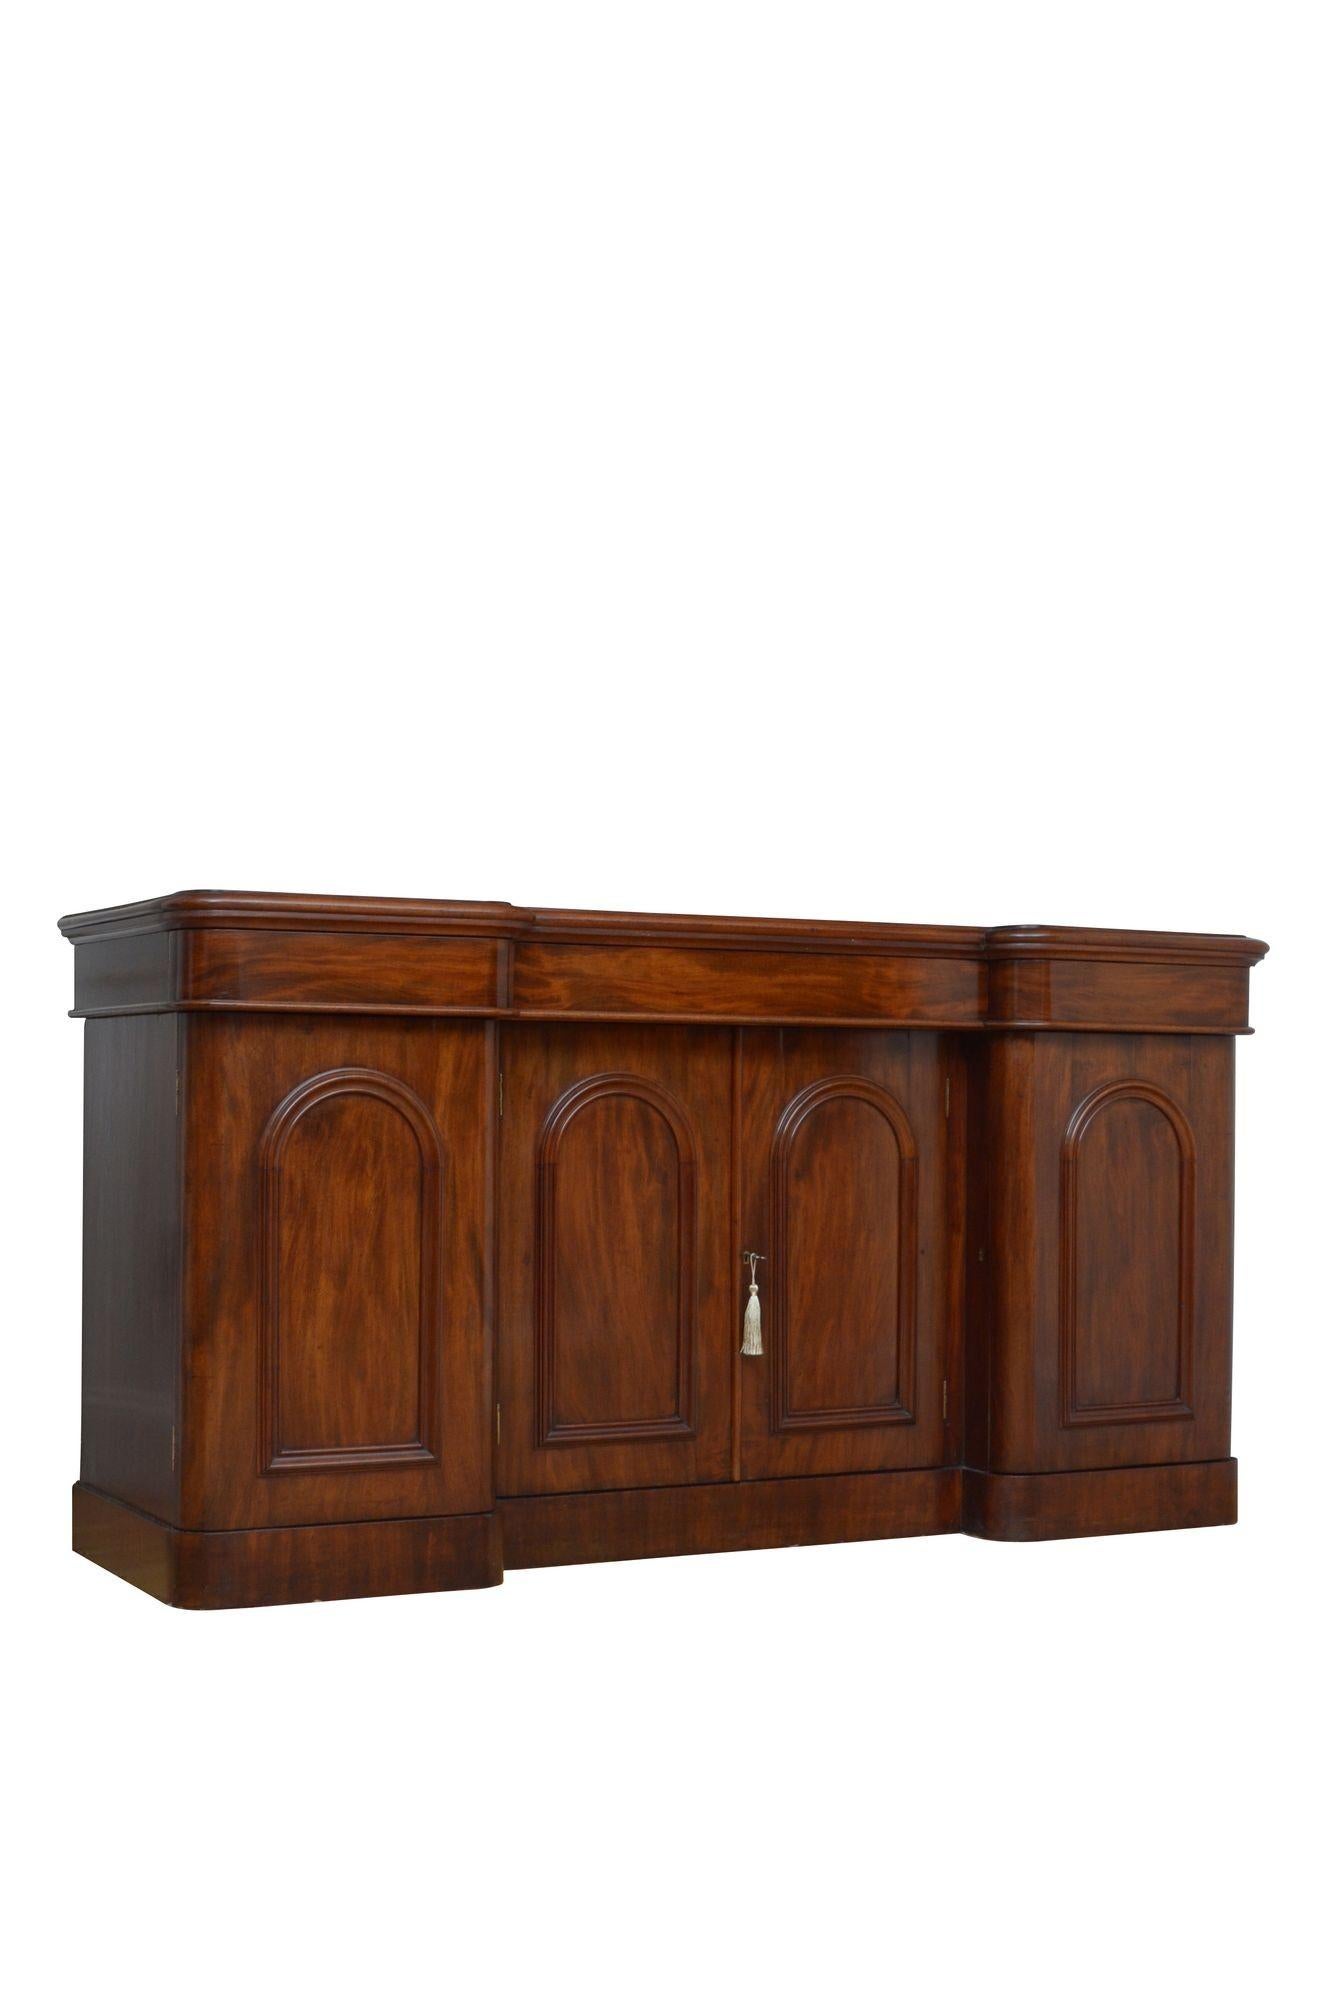 K0600 A fine quality English, Victorian mahogany four door breakfronted sideboard, having figured mahogany top with moulded edge, three oak lined, frieze drawers with newly lined with baize above arched and panelled, figured mahogany cupboard doors